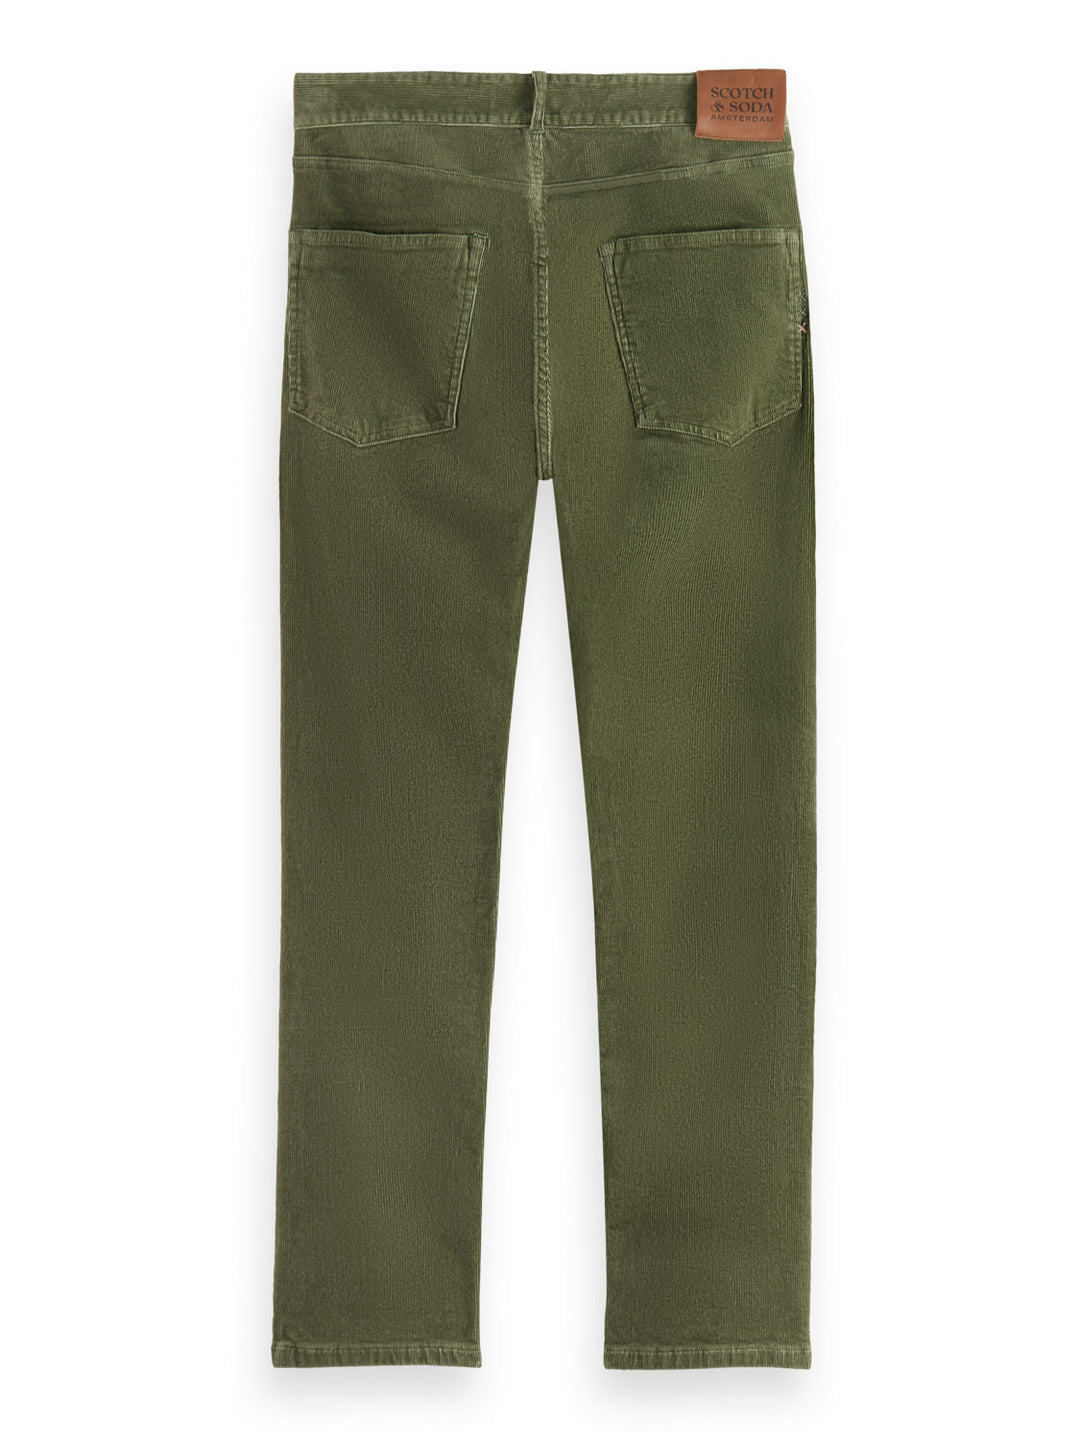 Scotch & Soda - Ralston Slim Fit Corduroy Pants in Army | Buster McGee